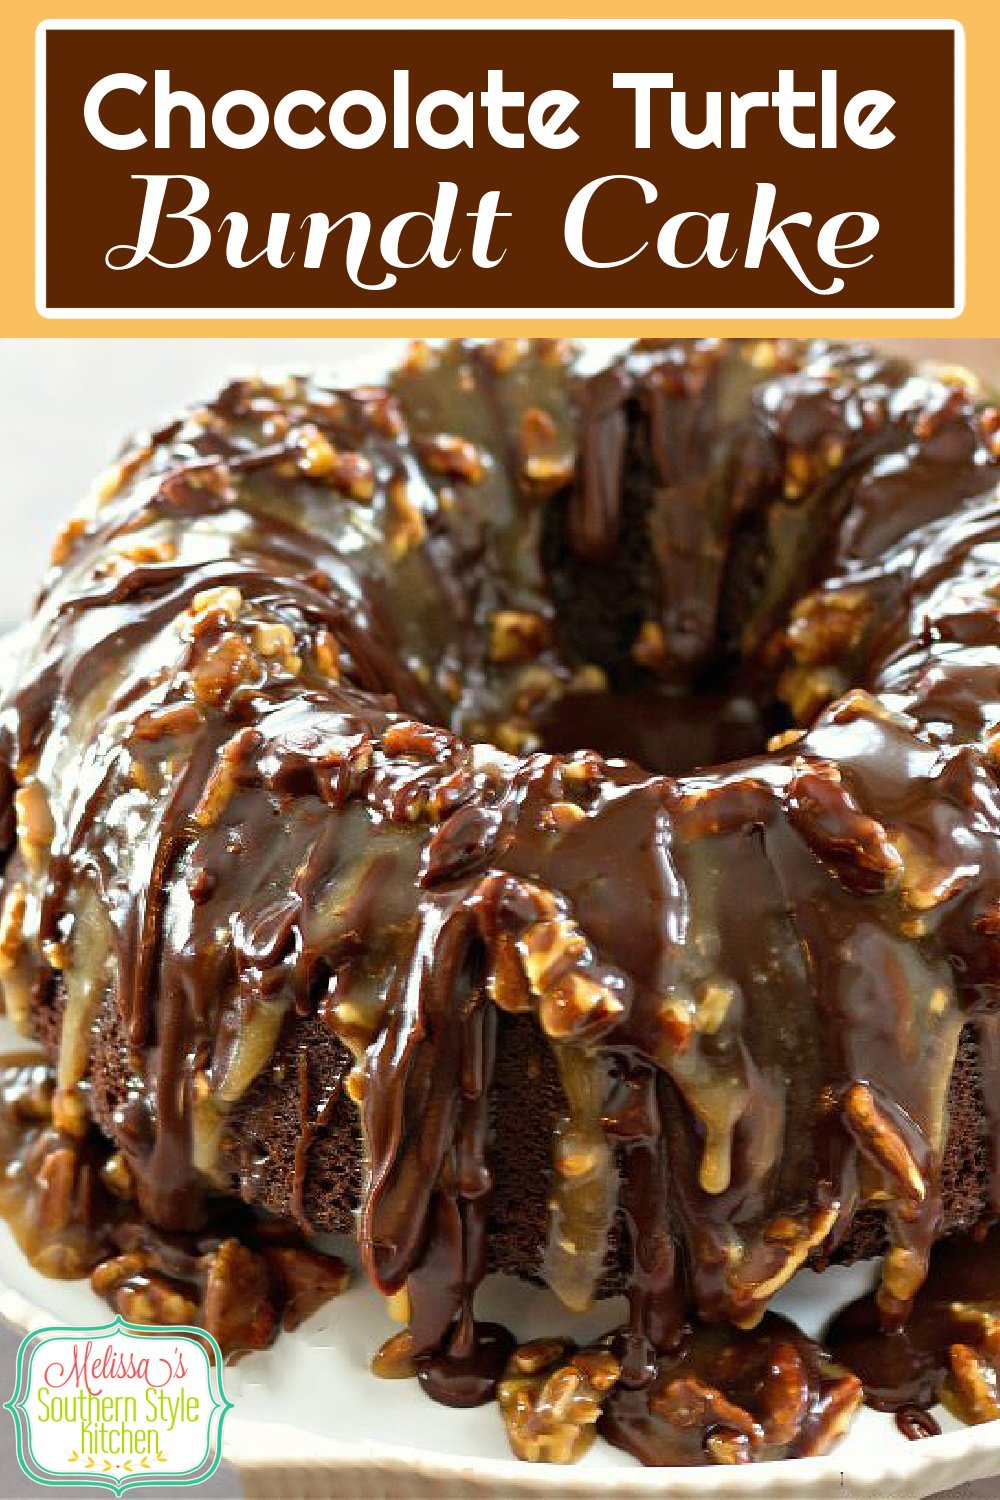 This stunning Chocolate Turtle Bundt Cake is is drizzled with a buttery homemade pecan-caramel sauce and fudgy chocolate ganache #turtlecake #turtlebundtcake #chocolatecakerecipes #chocolatecake via @melissasssk